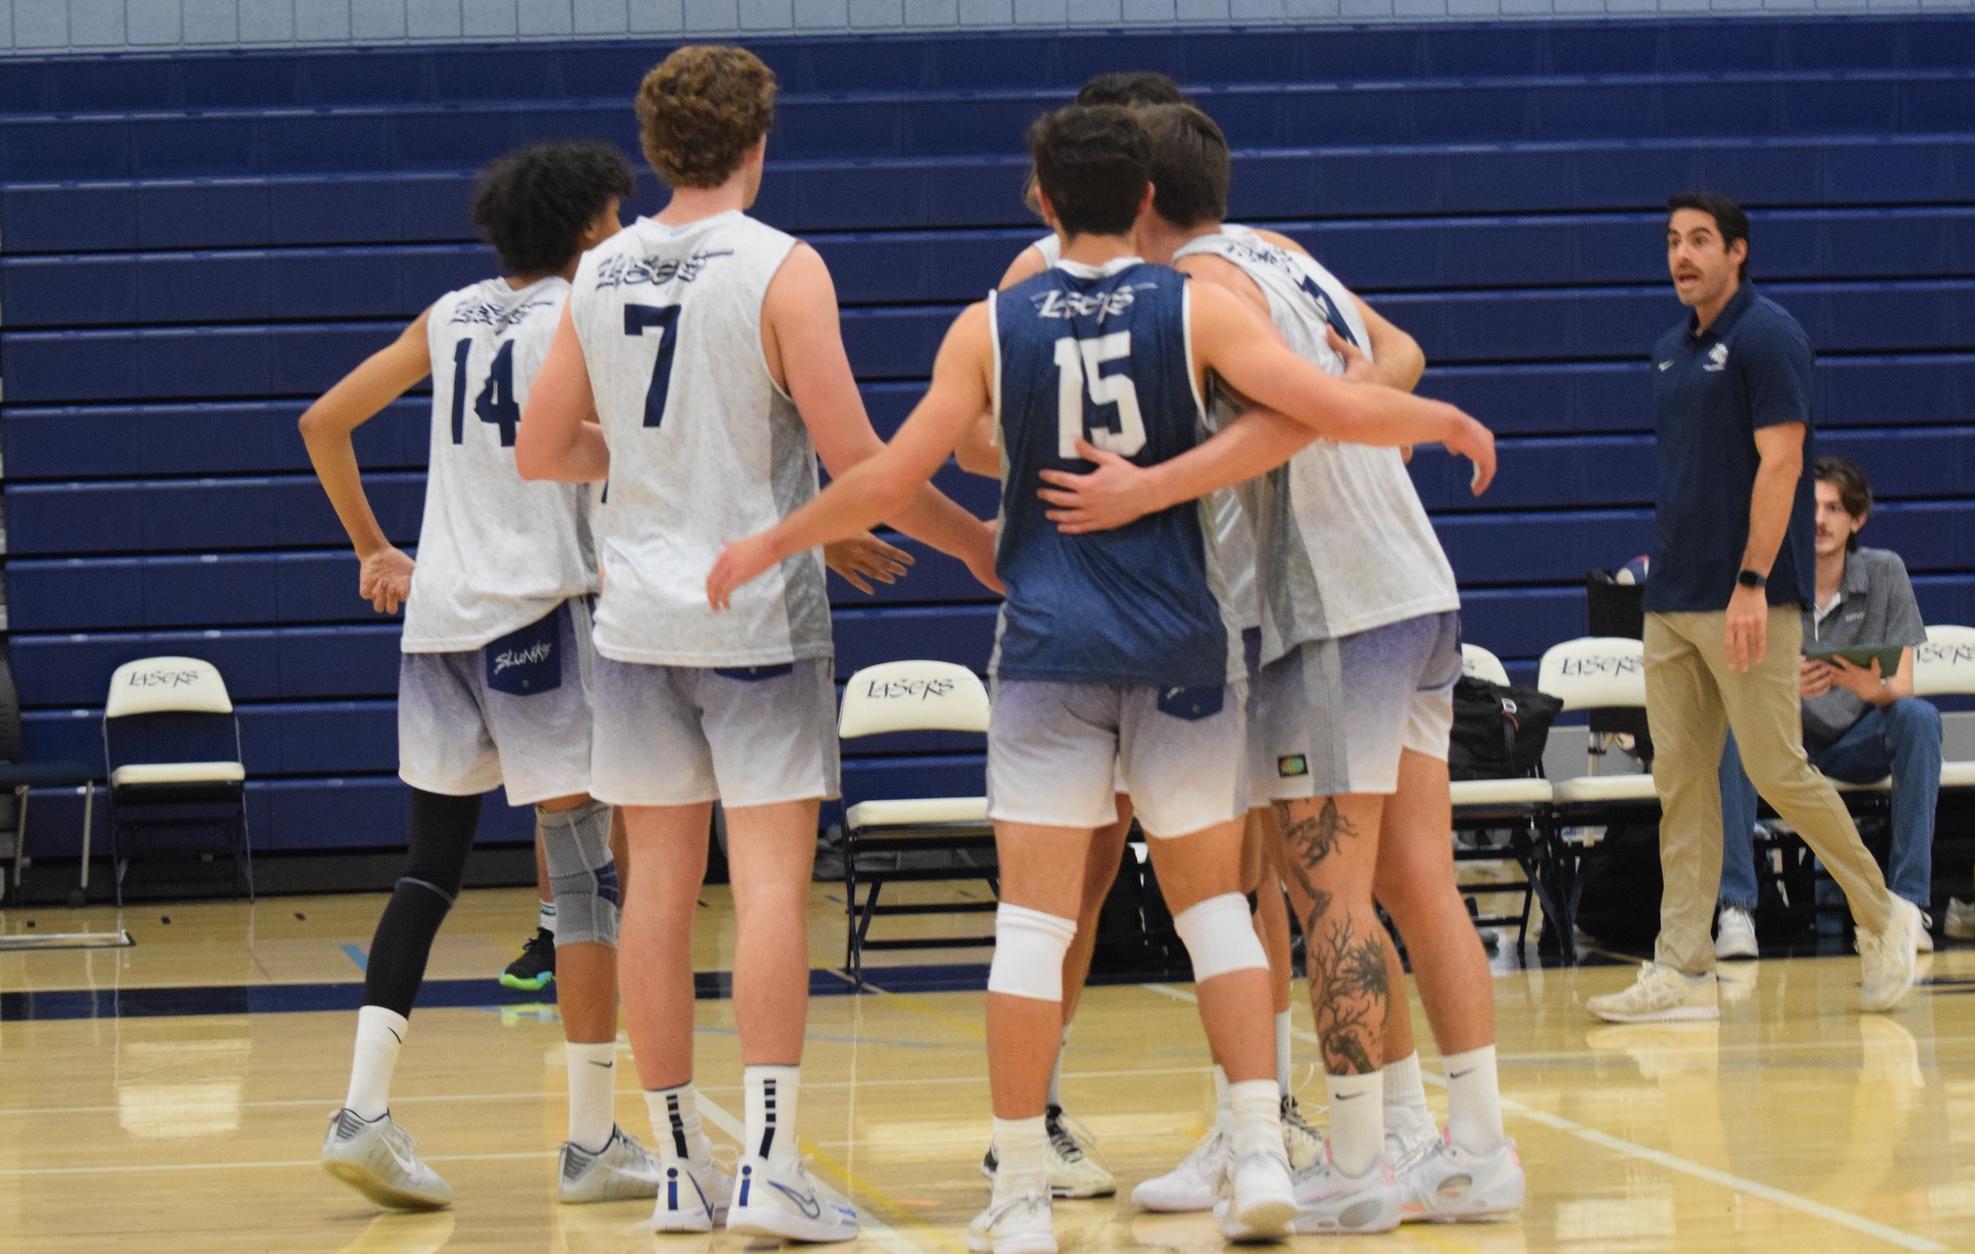 Men's volleyball team goes on the road and picks up big win